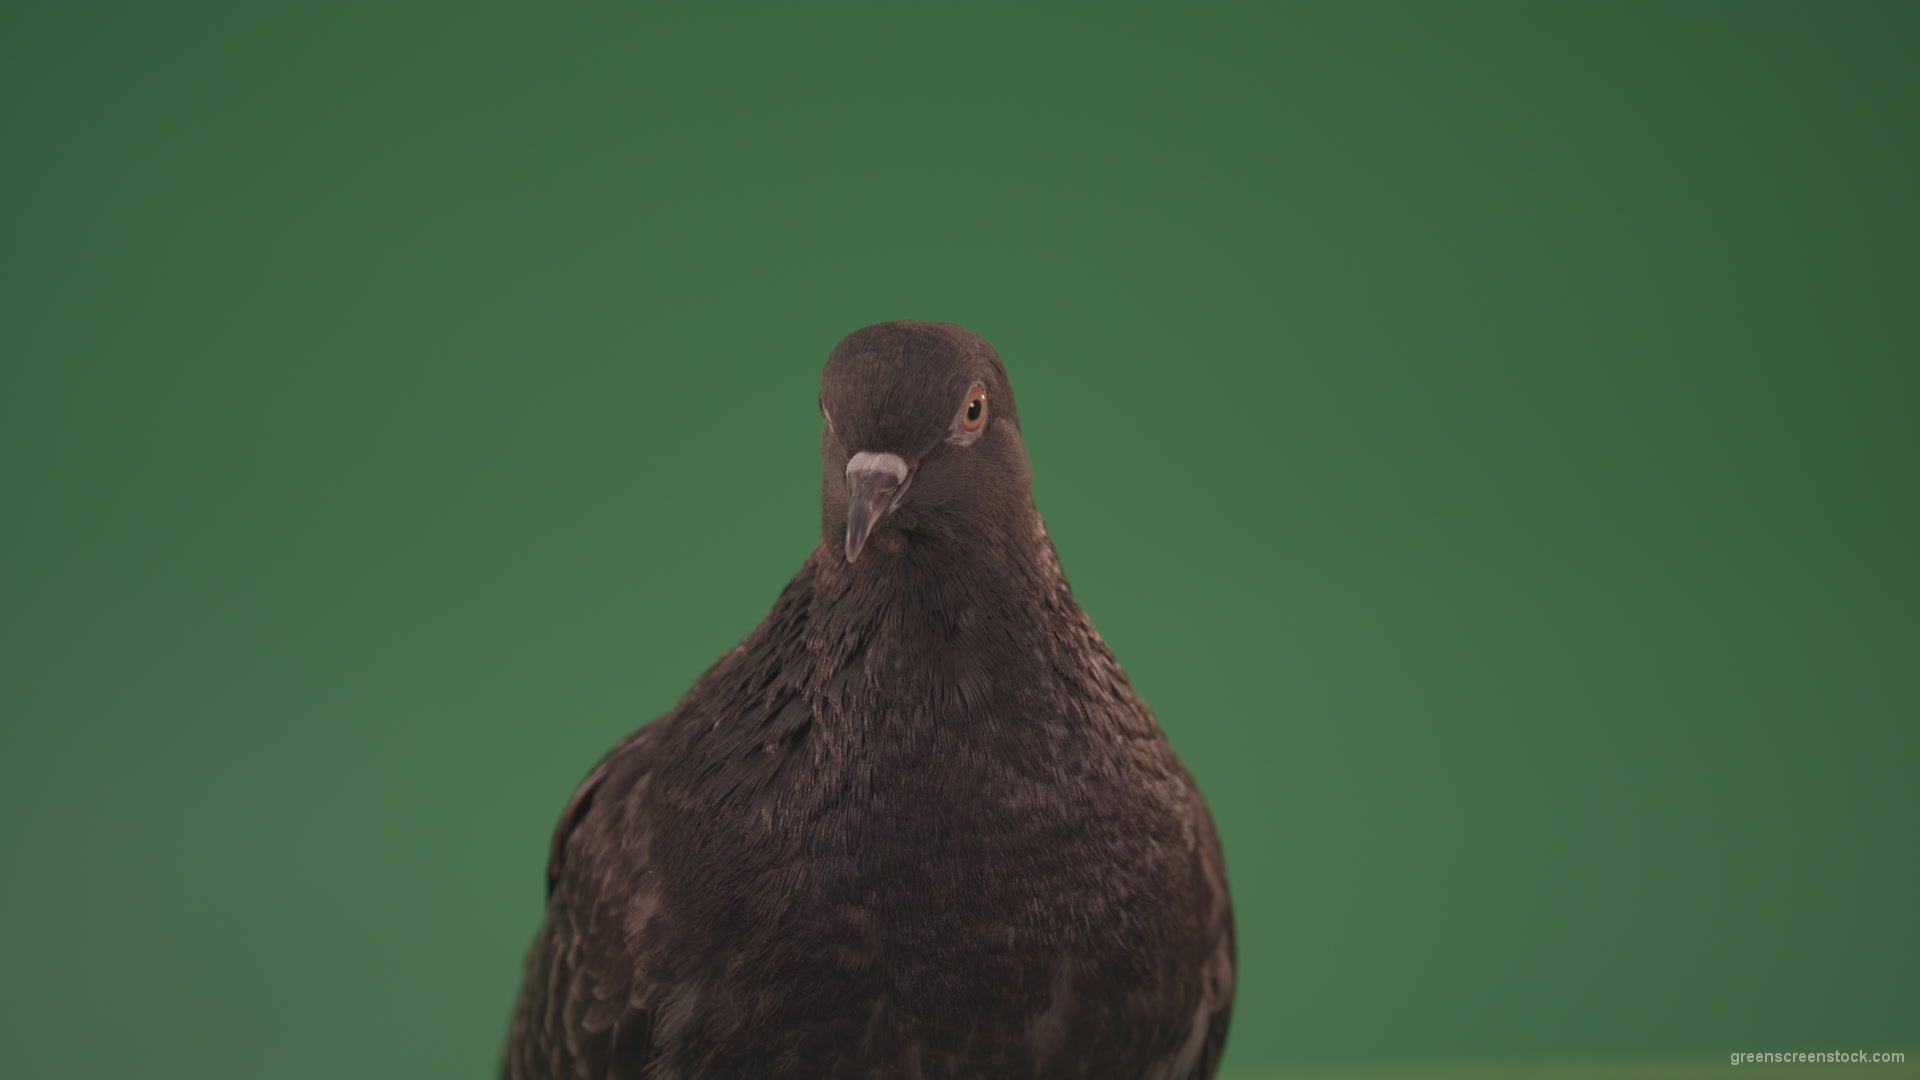 Dove-looks-at-the-city-from-the-height-of-the-birds-eye-isolated-on-chromakey-background_001 Green Screen Stock